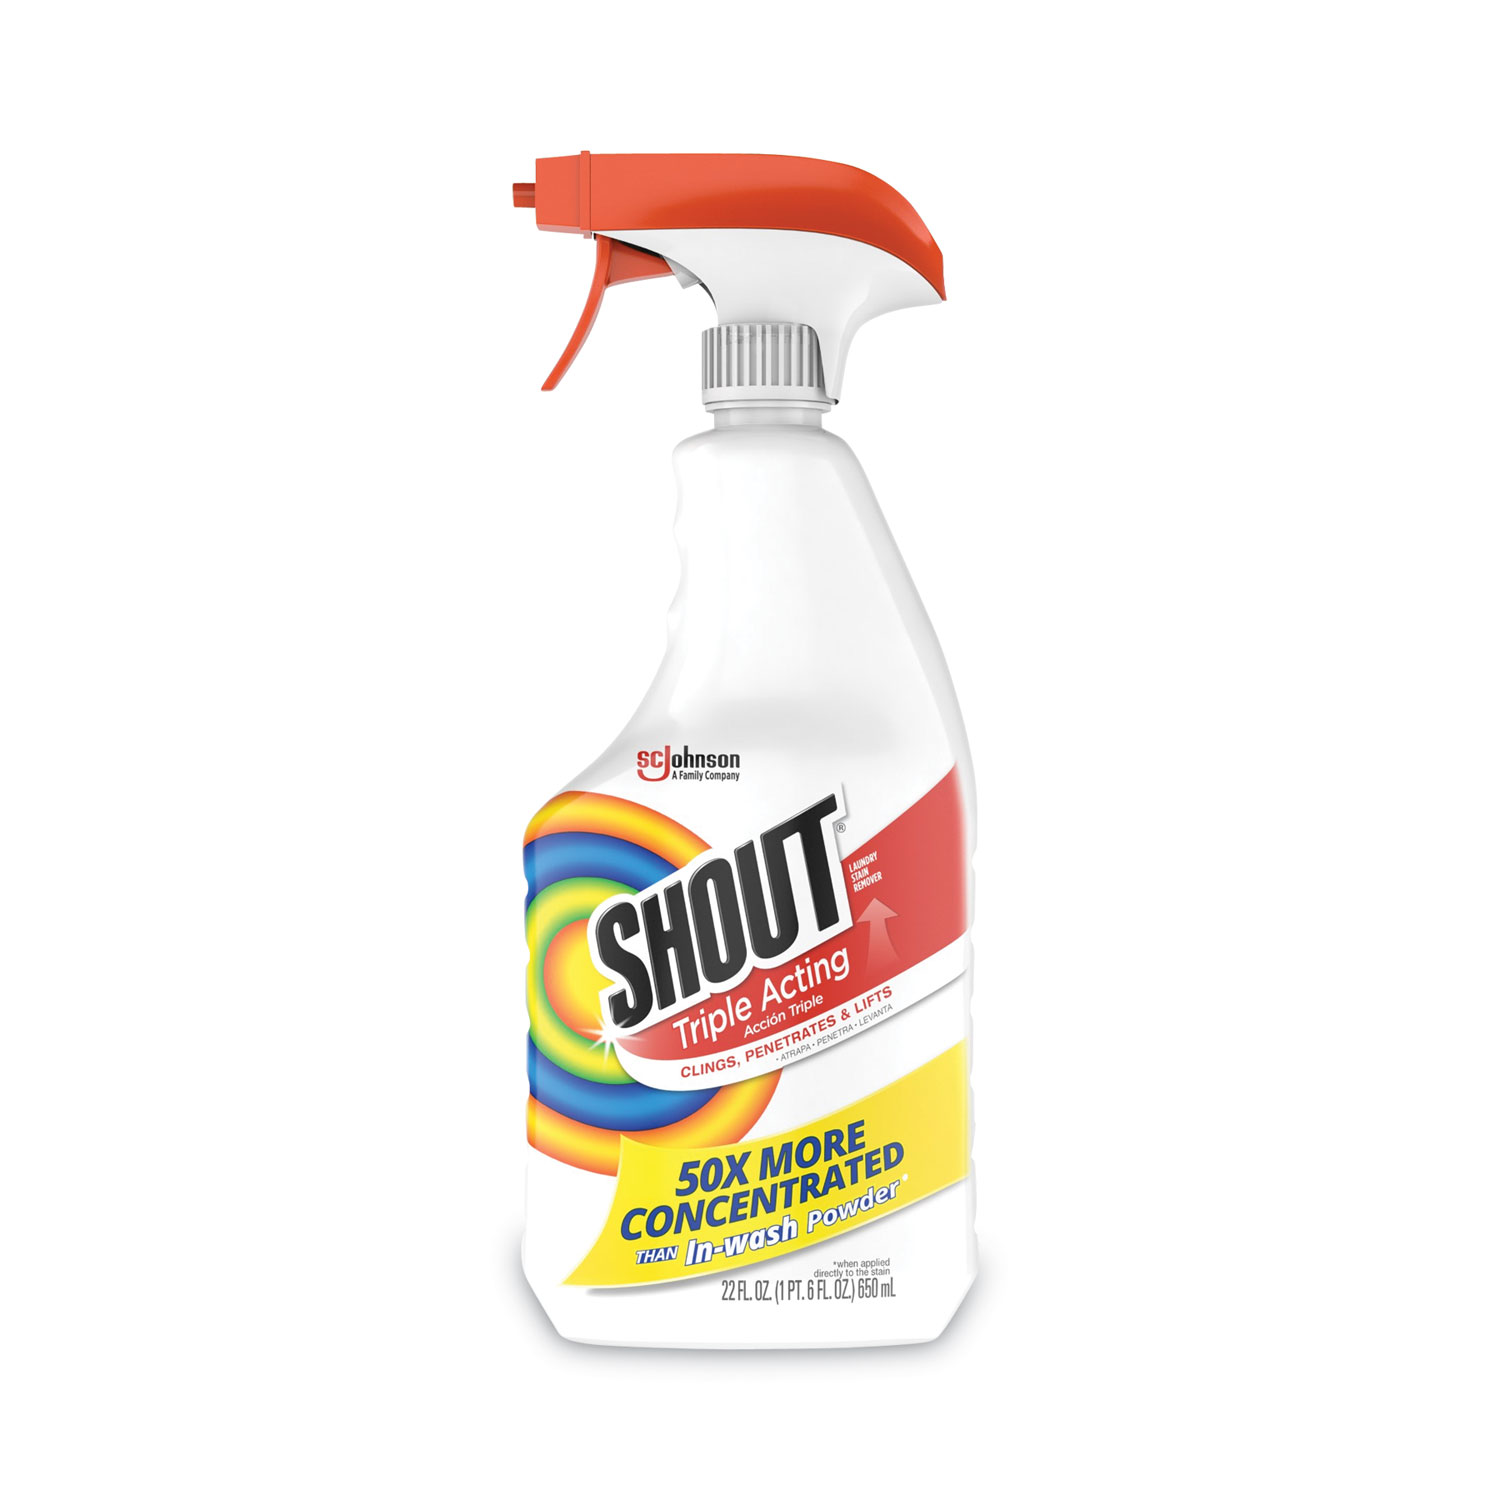 CI-0895) SC Johnson Shout 22 oz. Triple-Acting Laundry Stain Remover